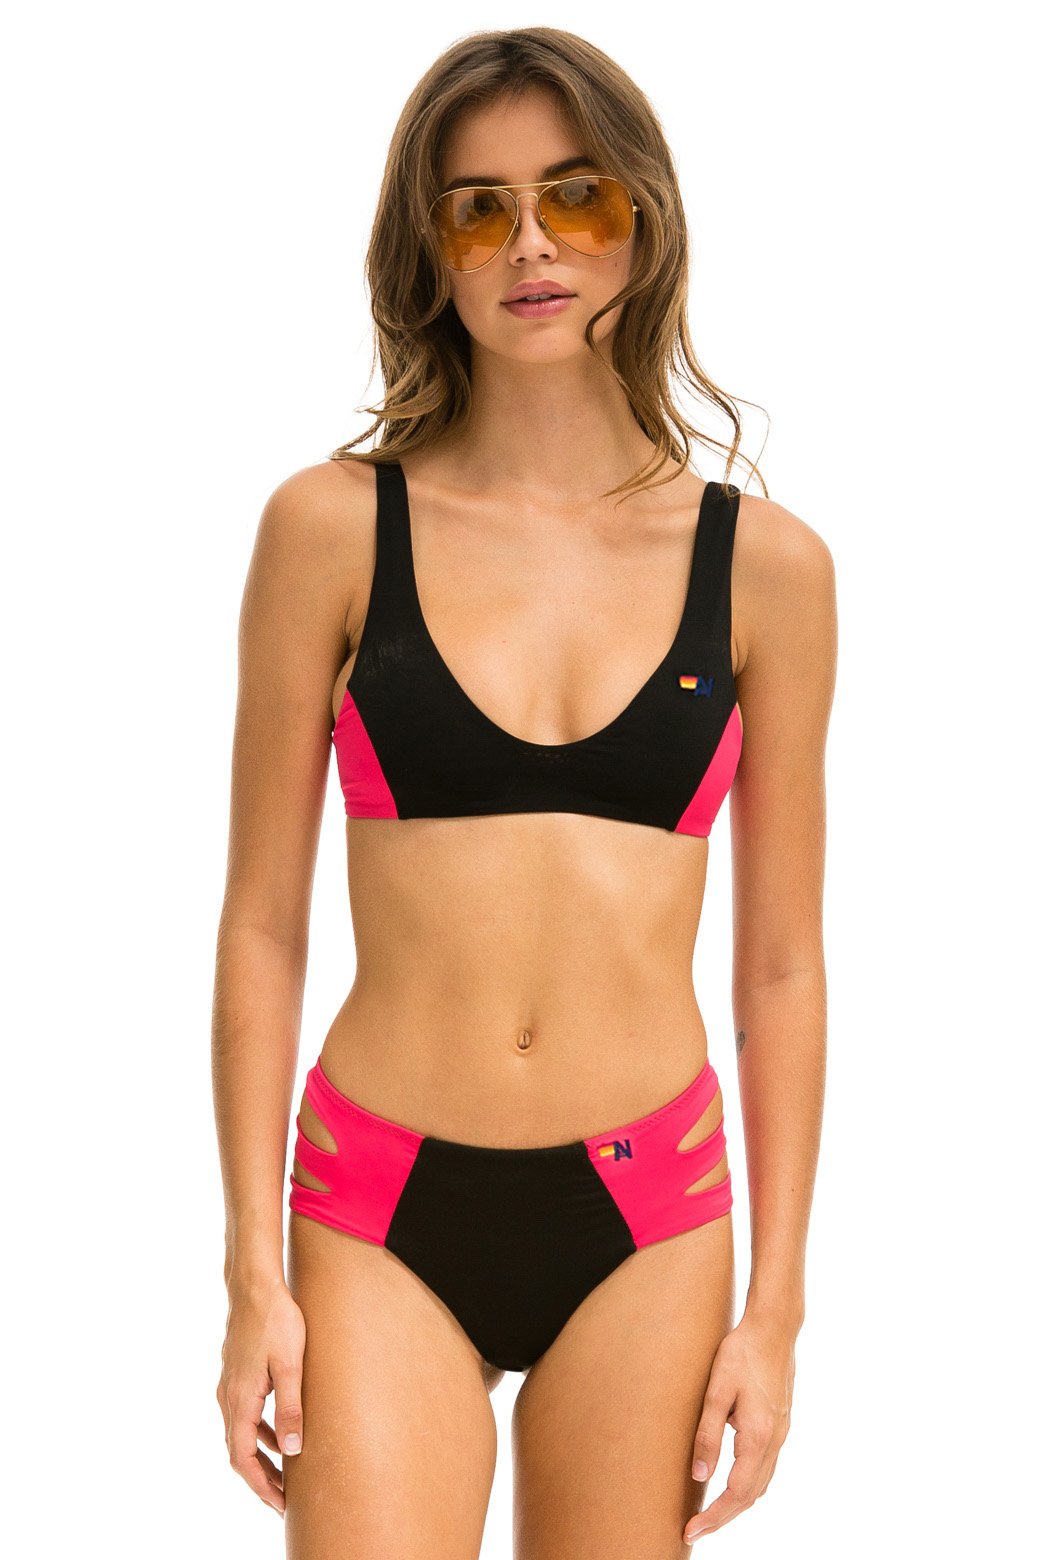 HI-WAISTED SIDE CUT OUT COLOR BLOCK FULL COVERAGE BRIEF BIKINI BOTTOMS - BLACK // RED Swim Aviator Nation 